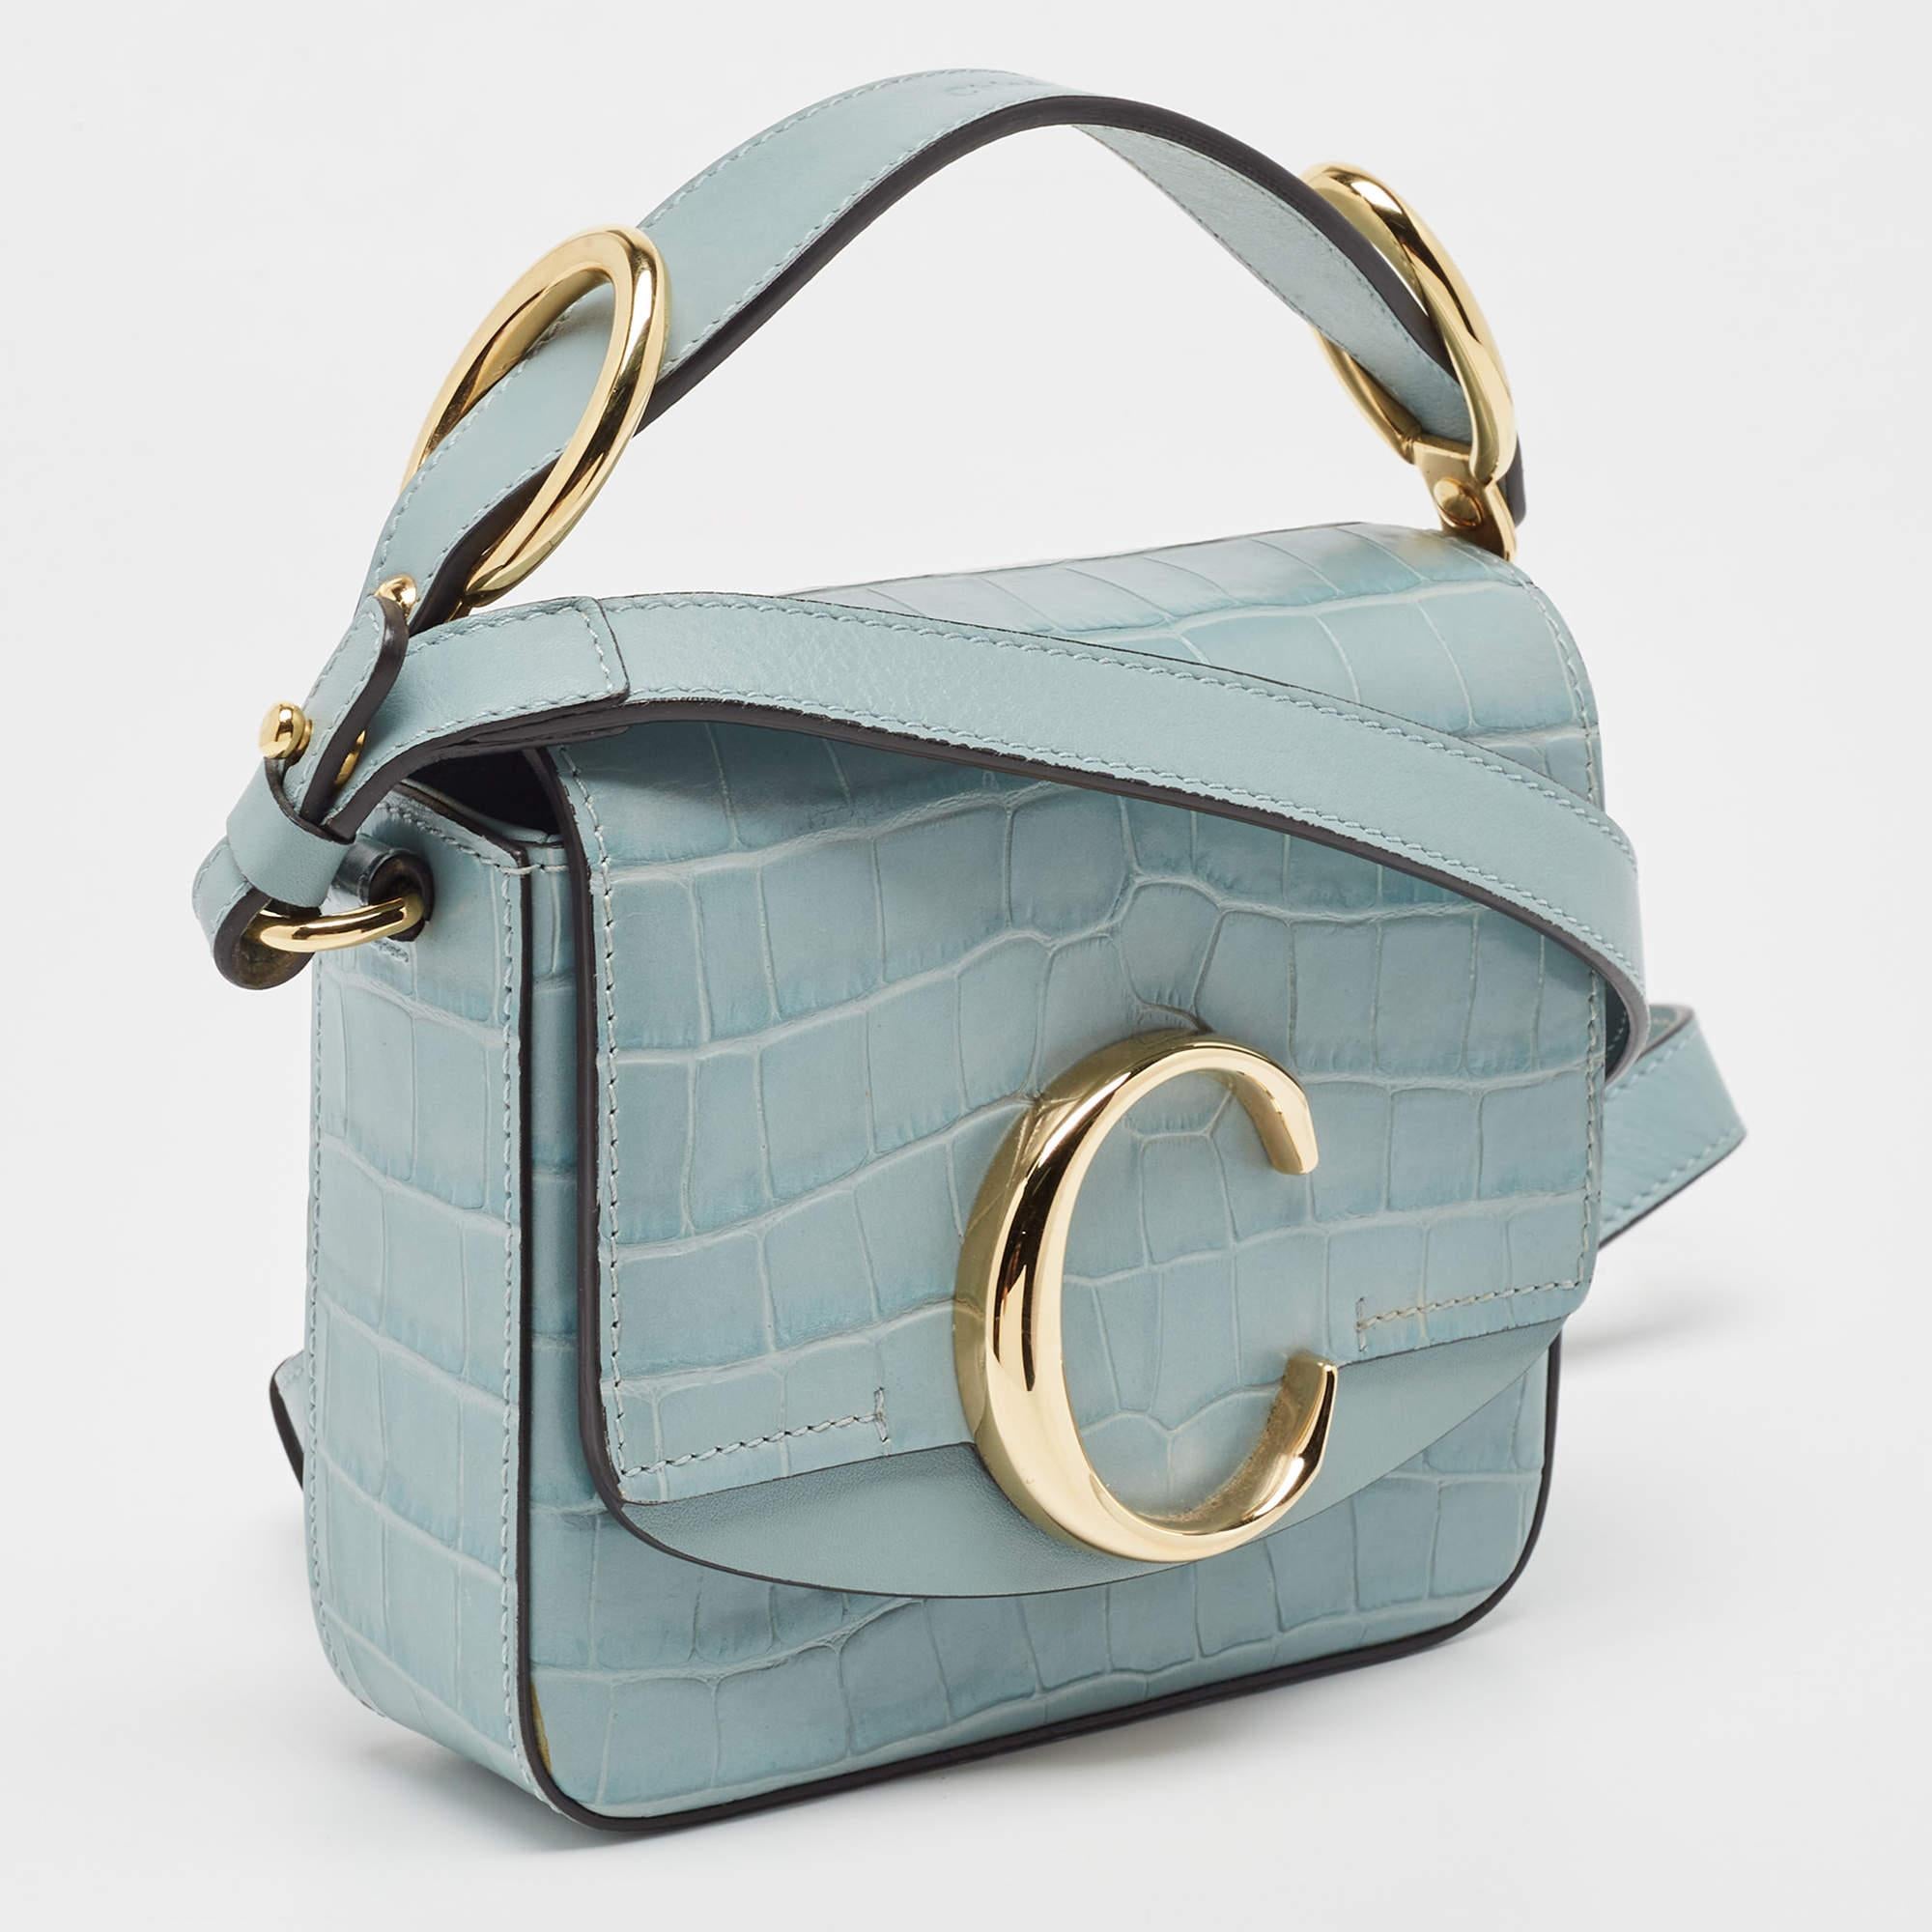 This Chloé's bag is a part of the much-loved C collection and has a structured silhouette that's particularly sleek and classy. Made from croc-embossed leather, it's the light blue shade that beautifully complements the gold-tone hardware. It